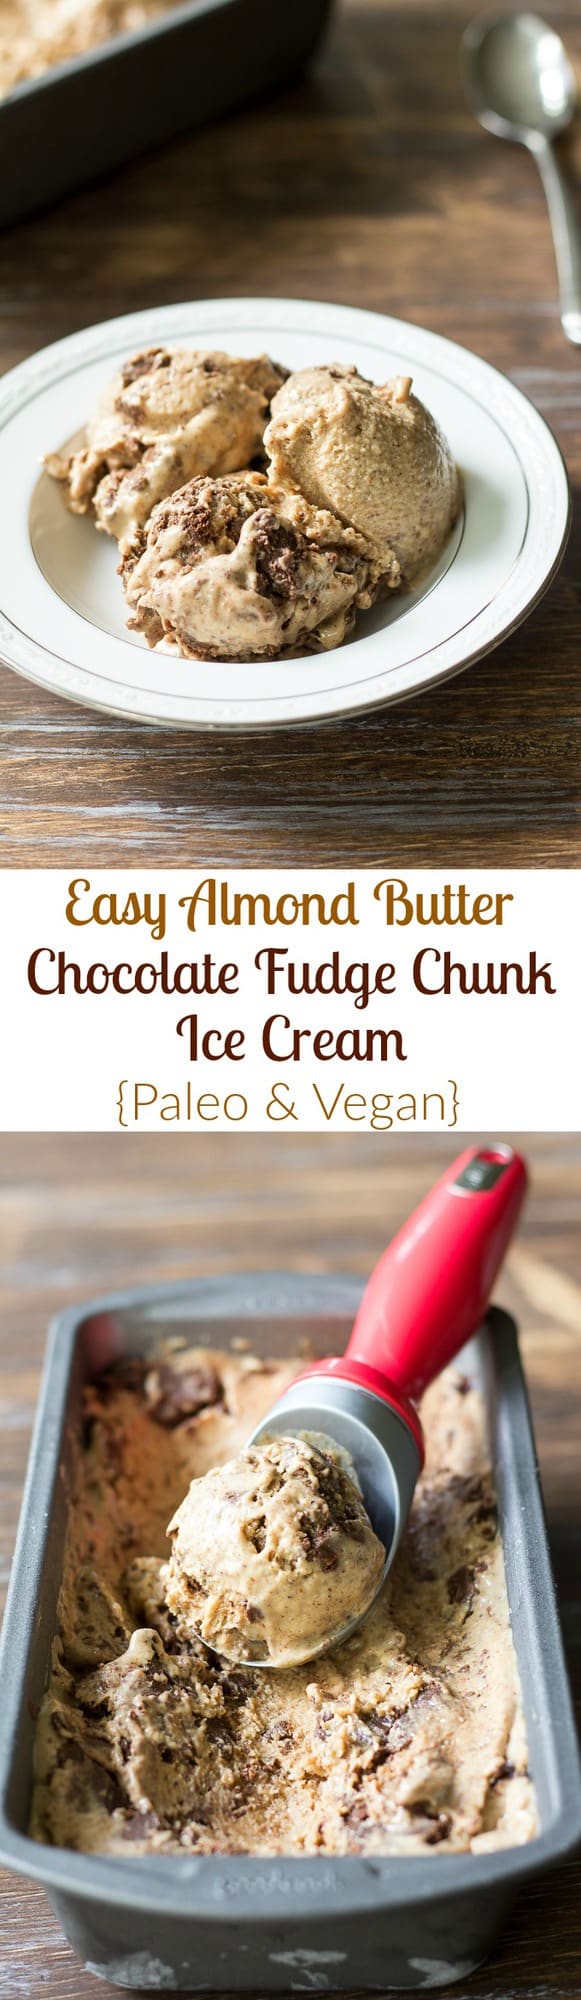 Easy no churn almond butter banana ice cream with rich chocolate almond butter fudge chunks throughout! It's incredibly delicious and actually good for you! Paleo, vegan, and no refined sugar